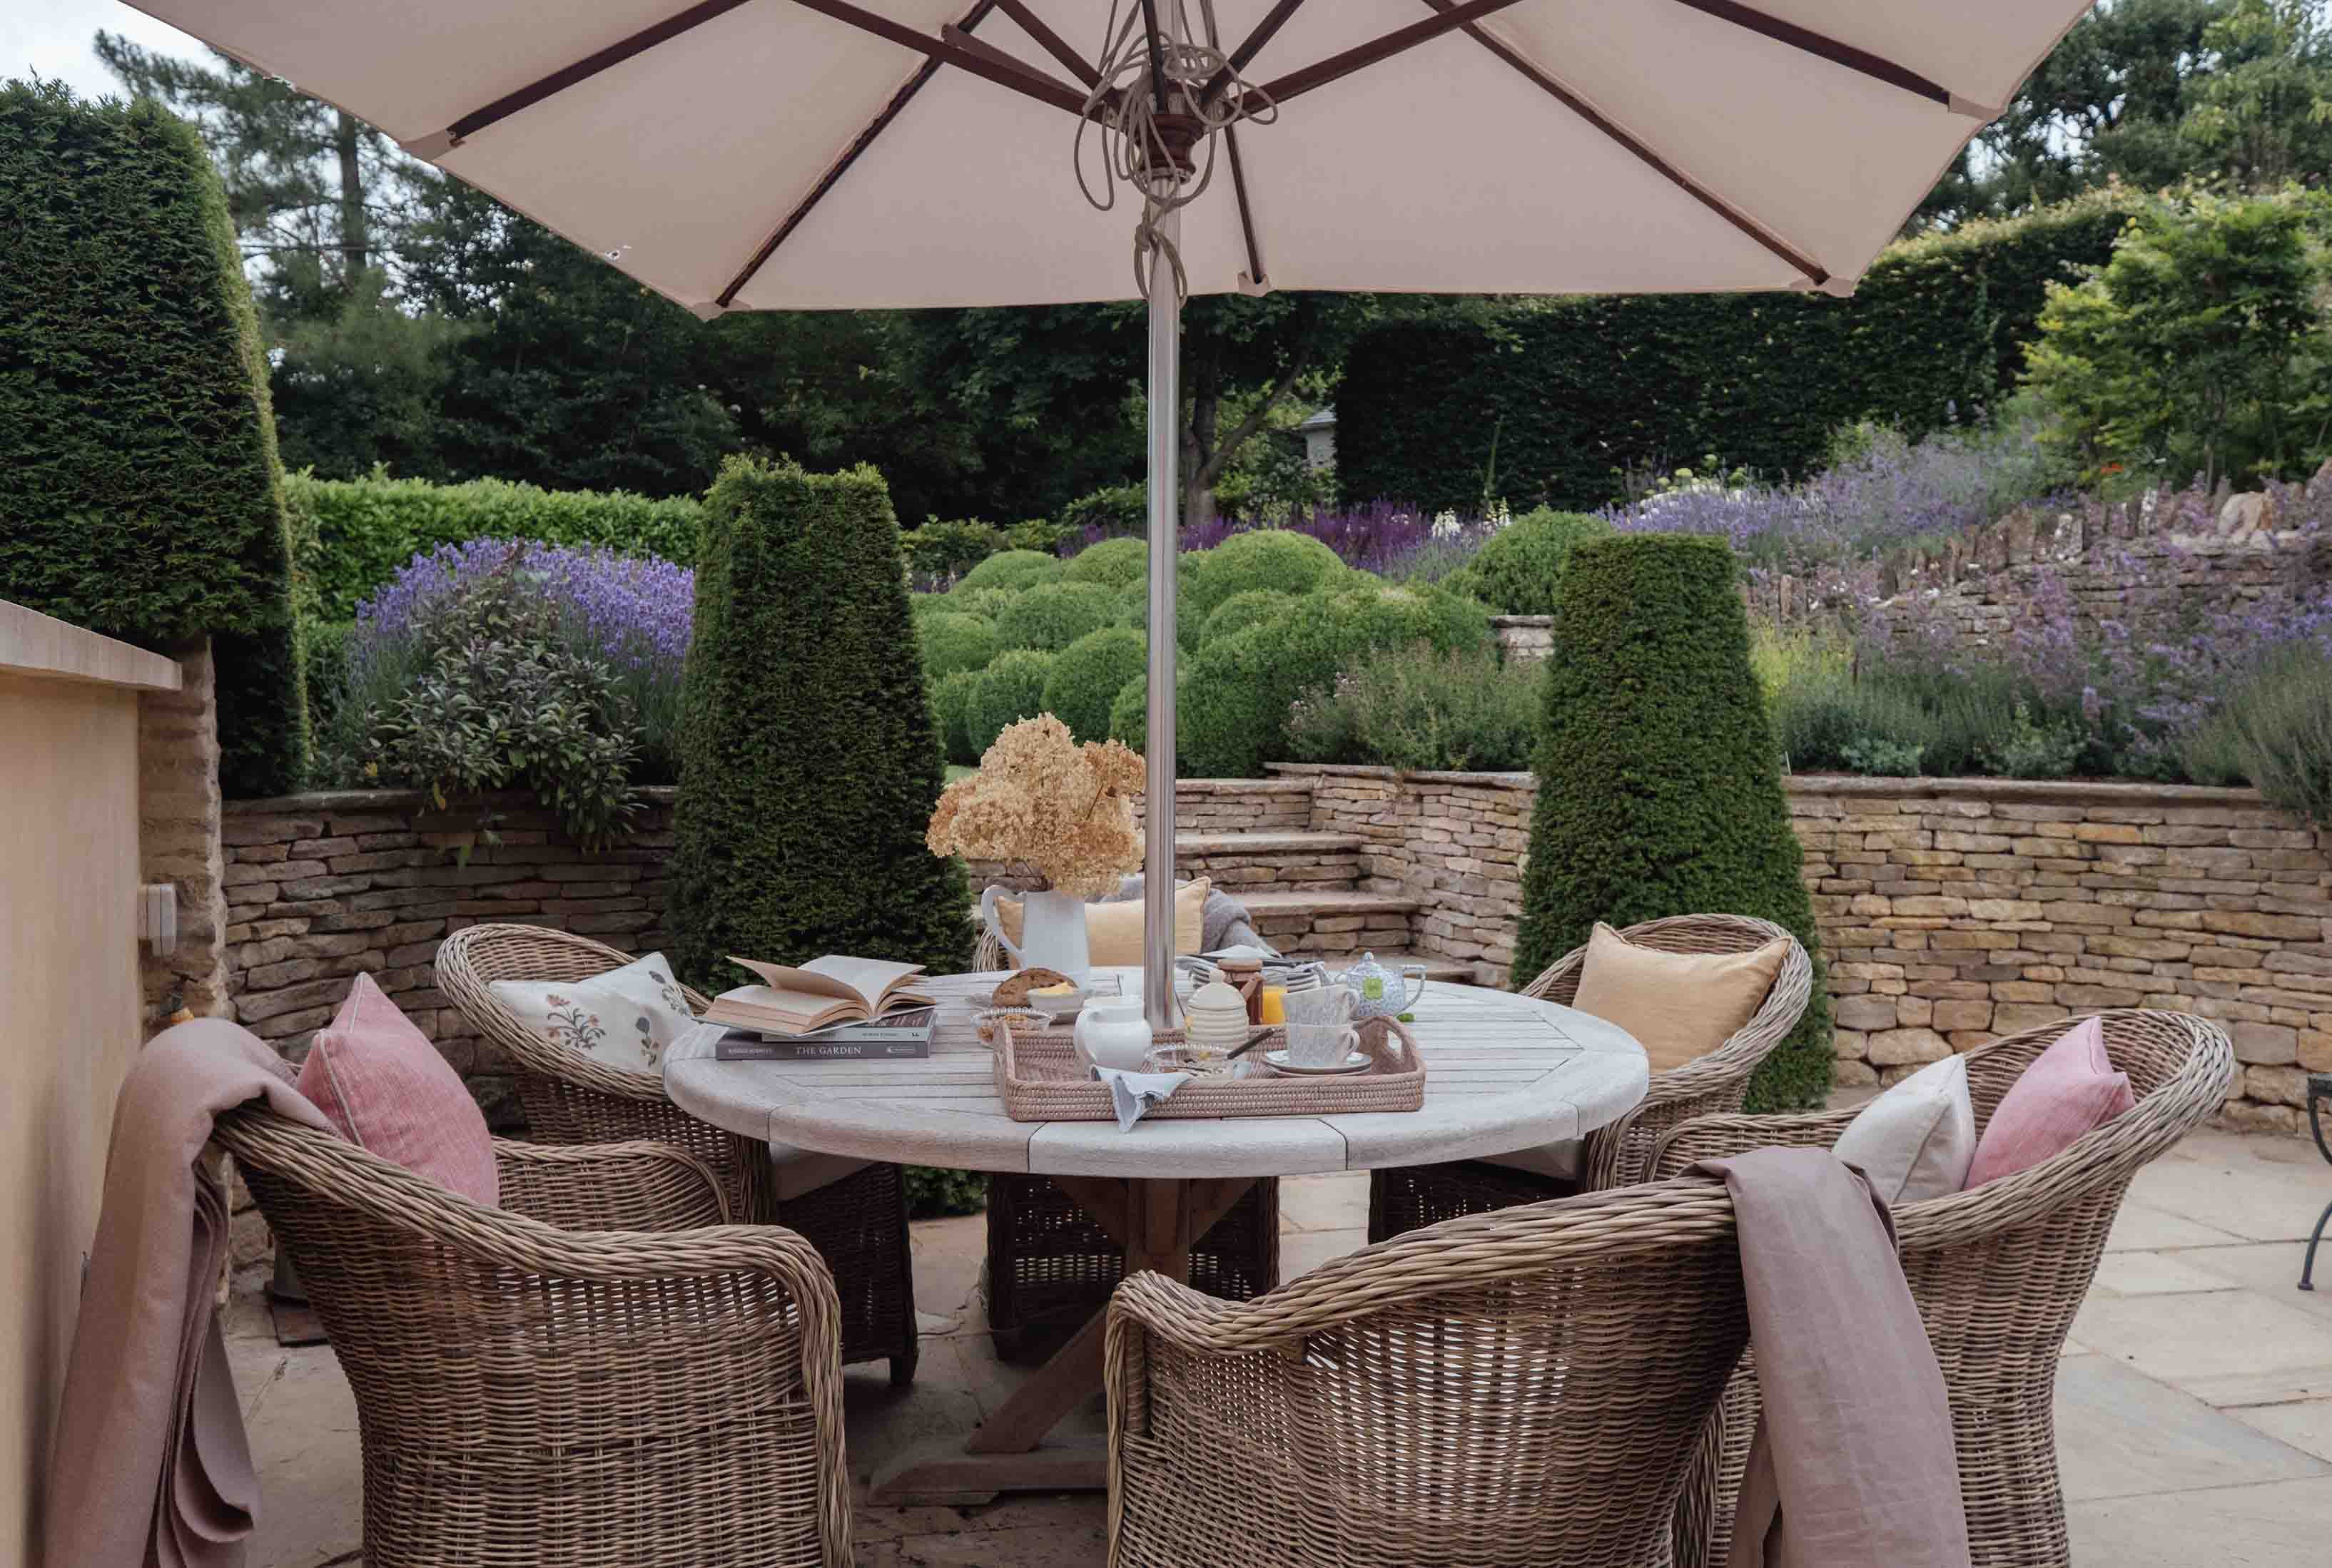 A picturesque garden arrangement at Lavender with an outdoor table and chairs shaded by a pretty parasol